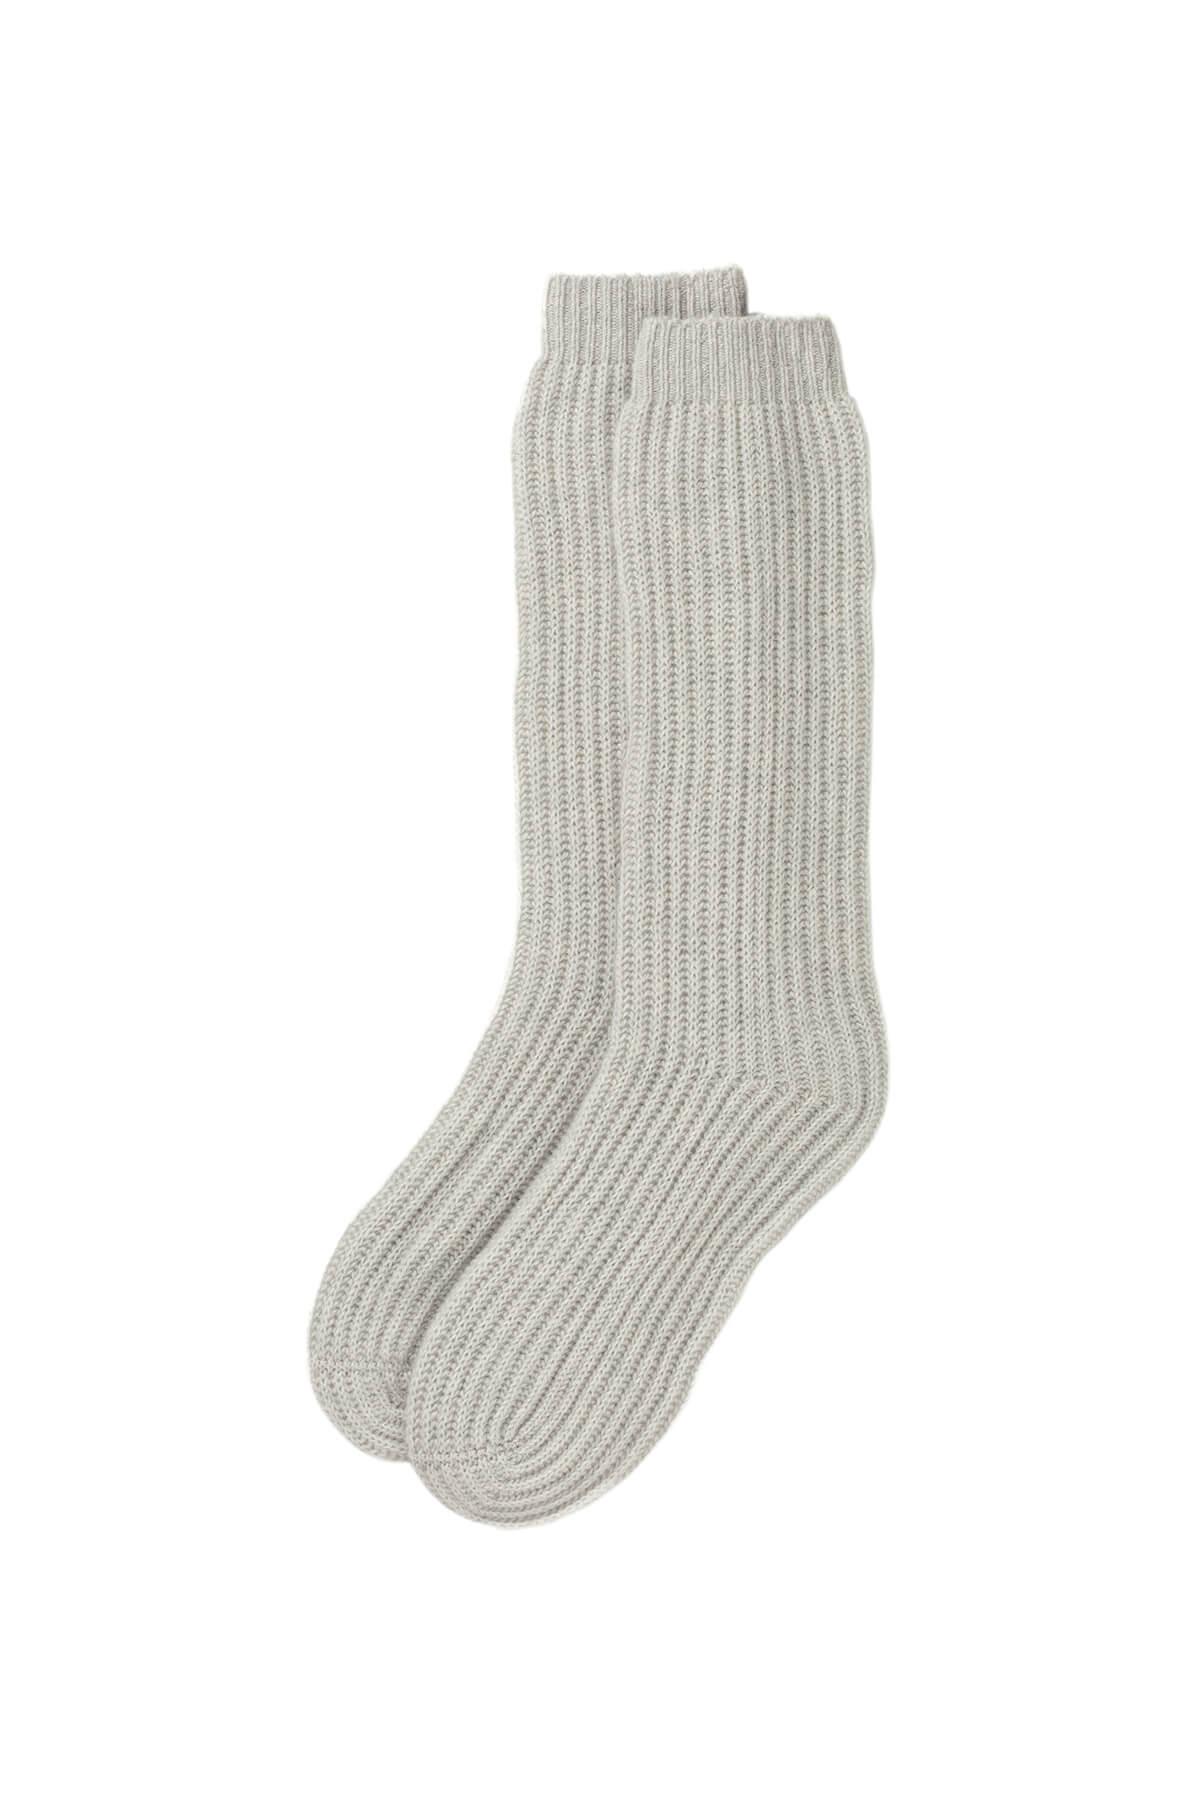 Johnstons of Elgin’s Pumice Luxe Ribbed Cashmere Bed Socks on a white background HAE02240HA0090N/A